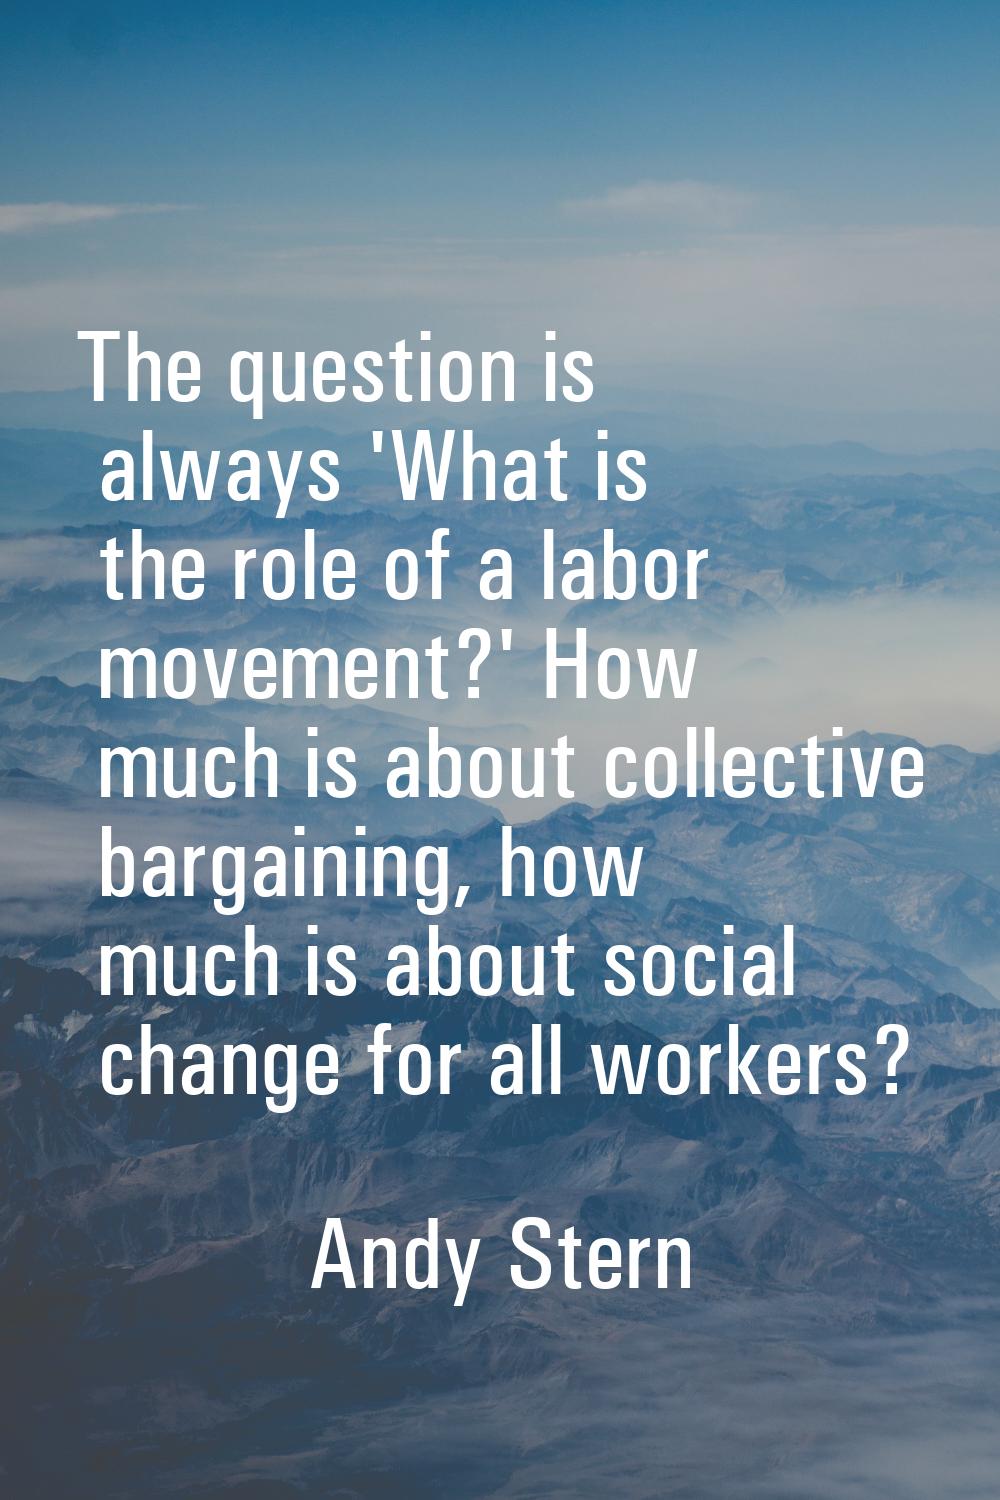 The question is always 'What is the role of a labor movement?' How much is about collective bargain